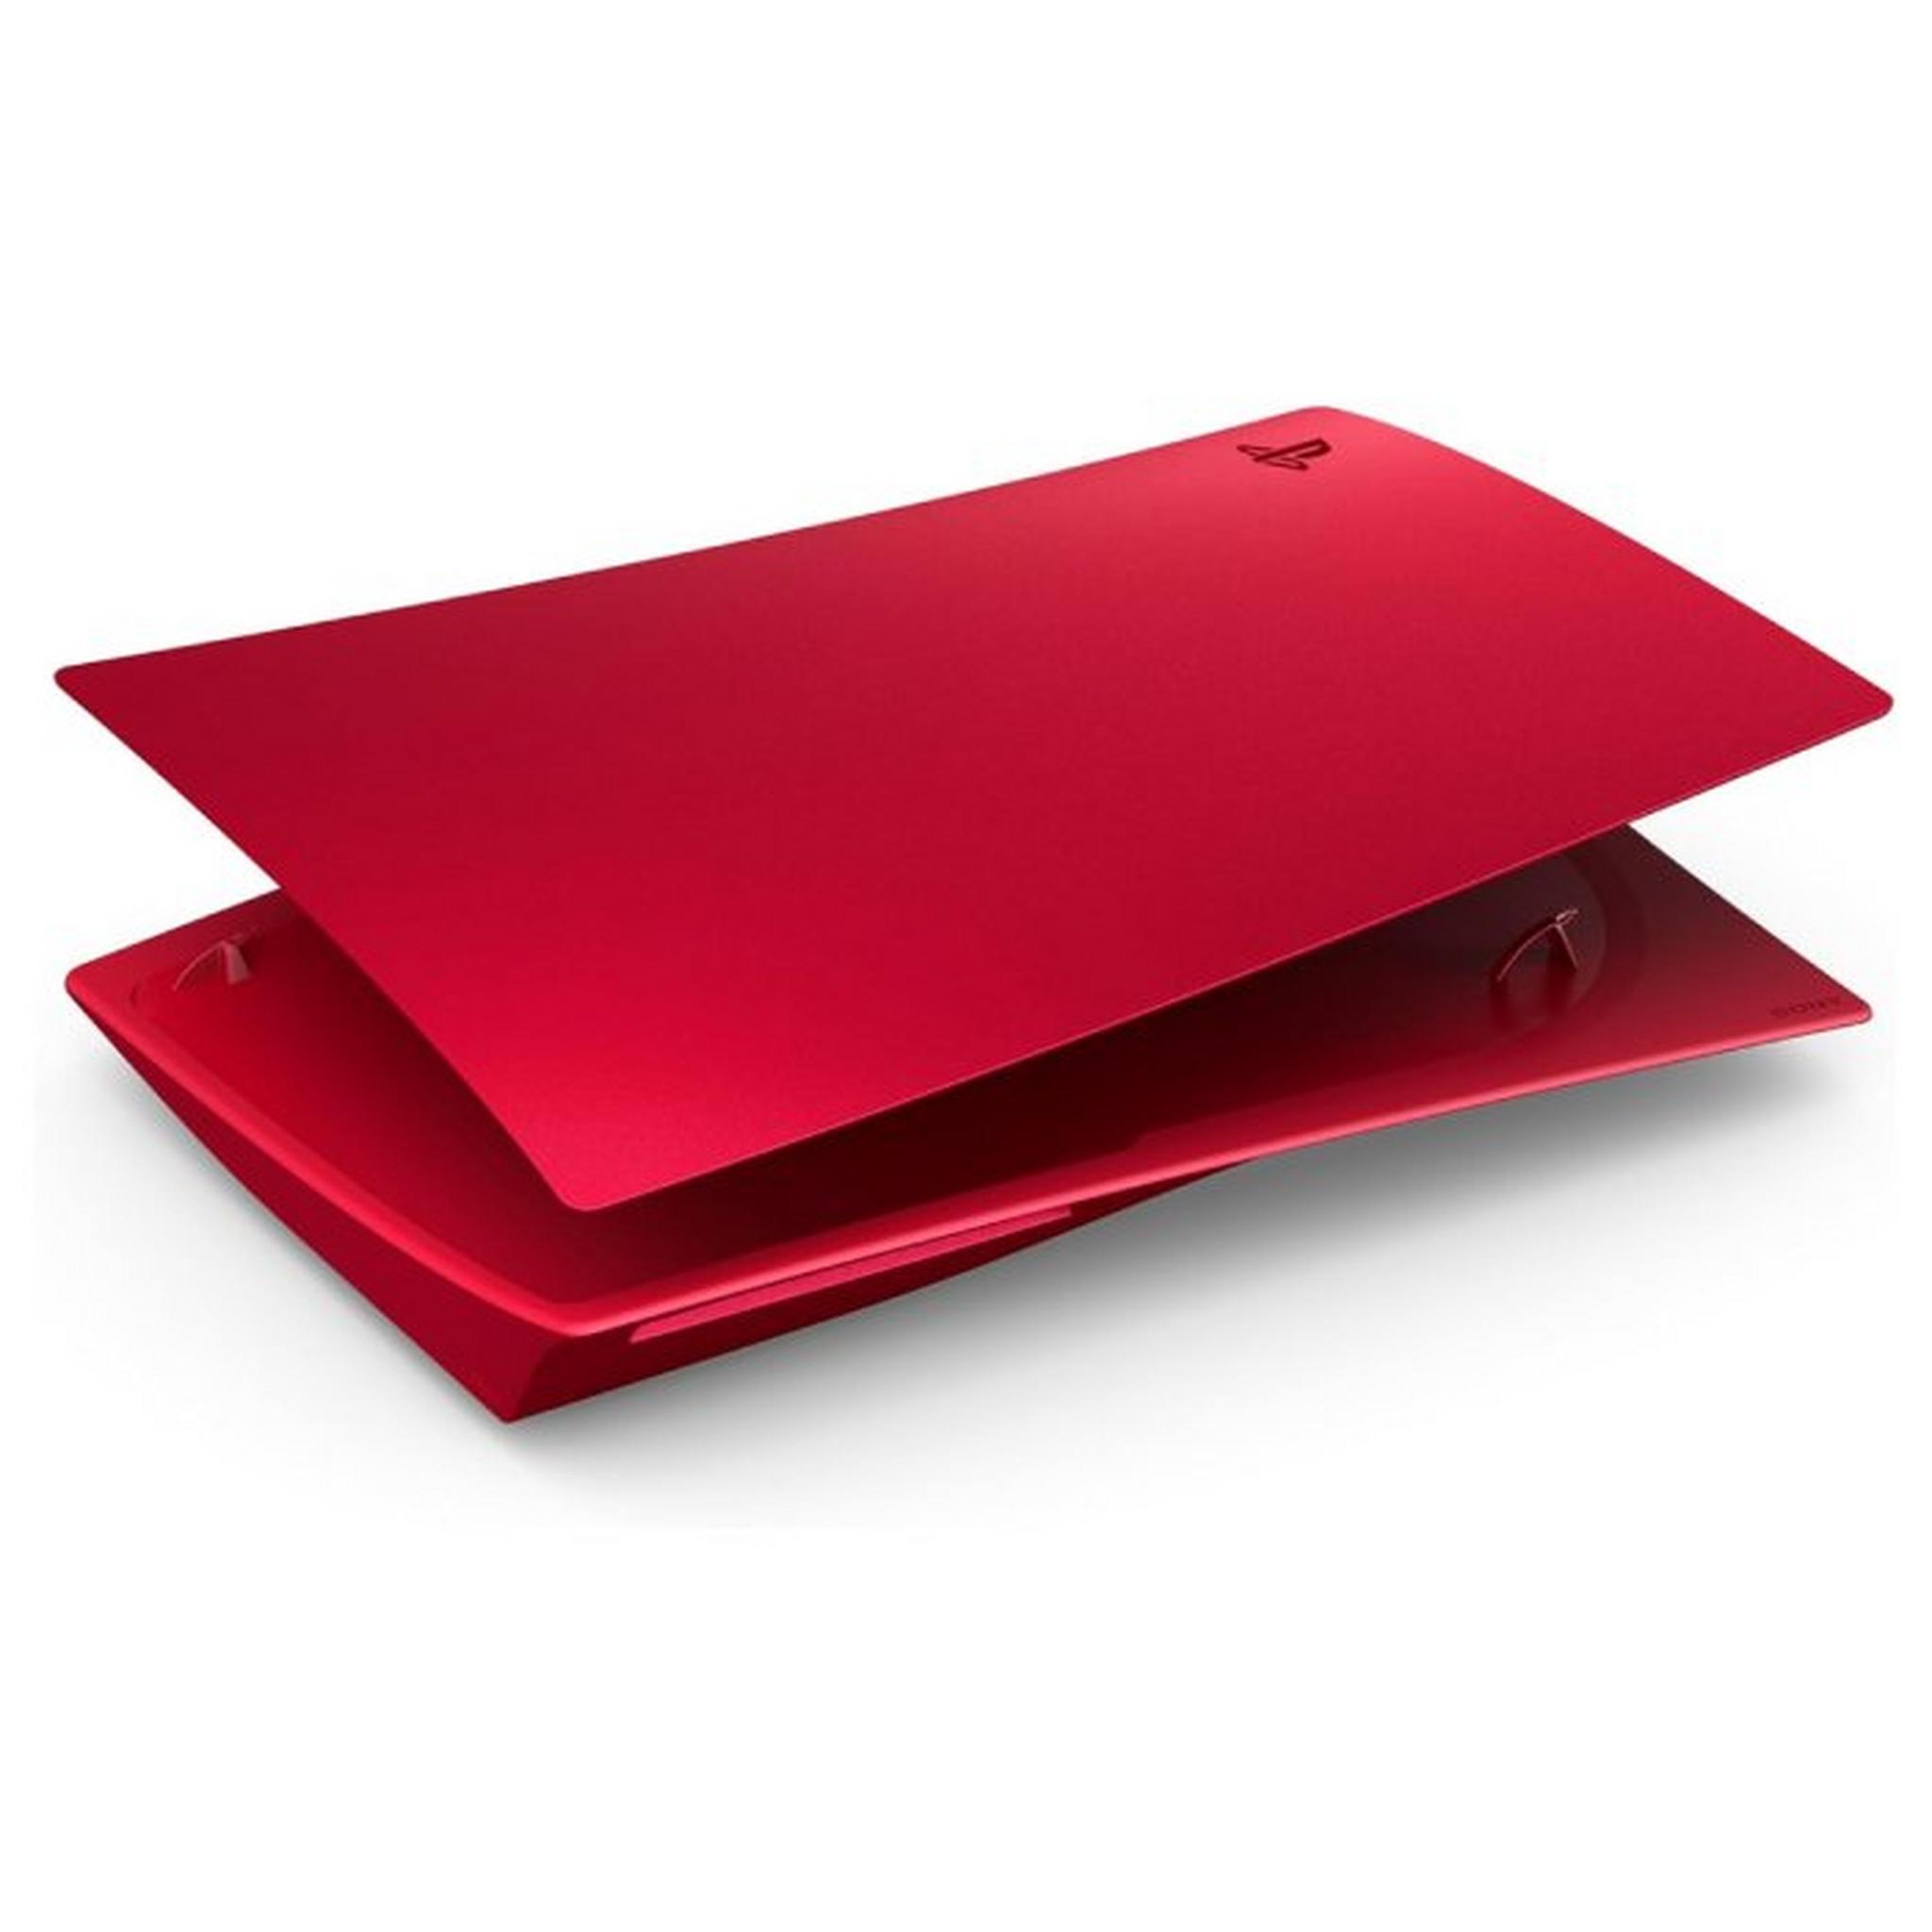 Sony PlayStation 5 standerd Cover Faceplate, CFI-ZCA1W07X/STD - Volcanic Red